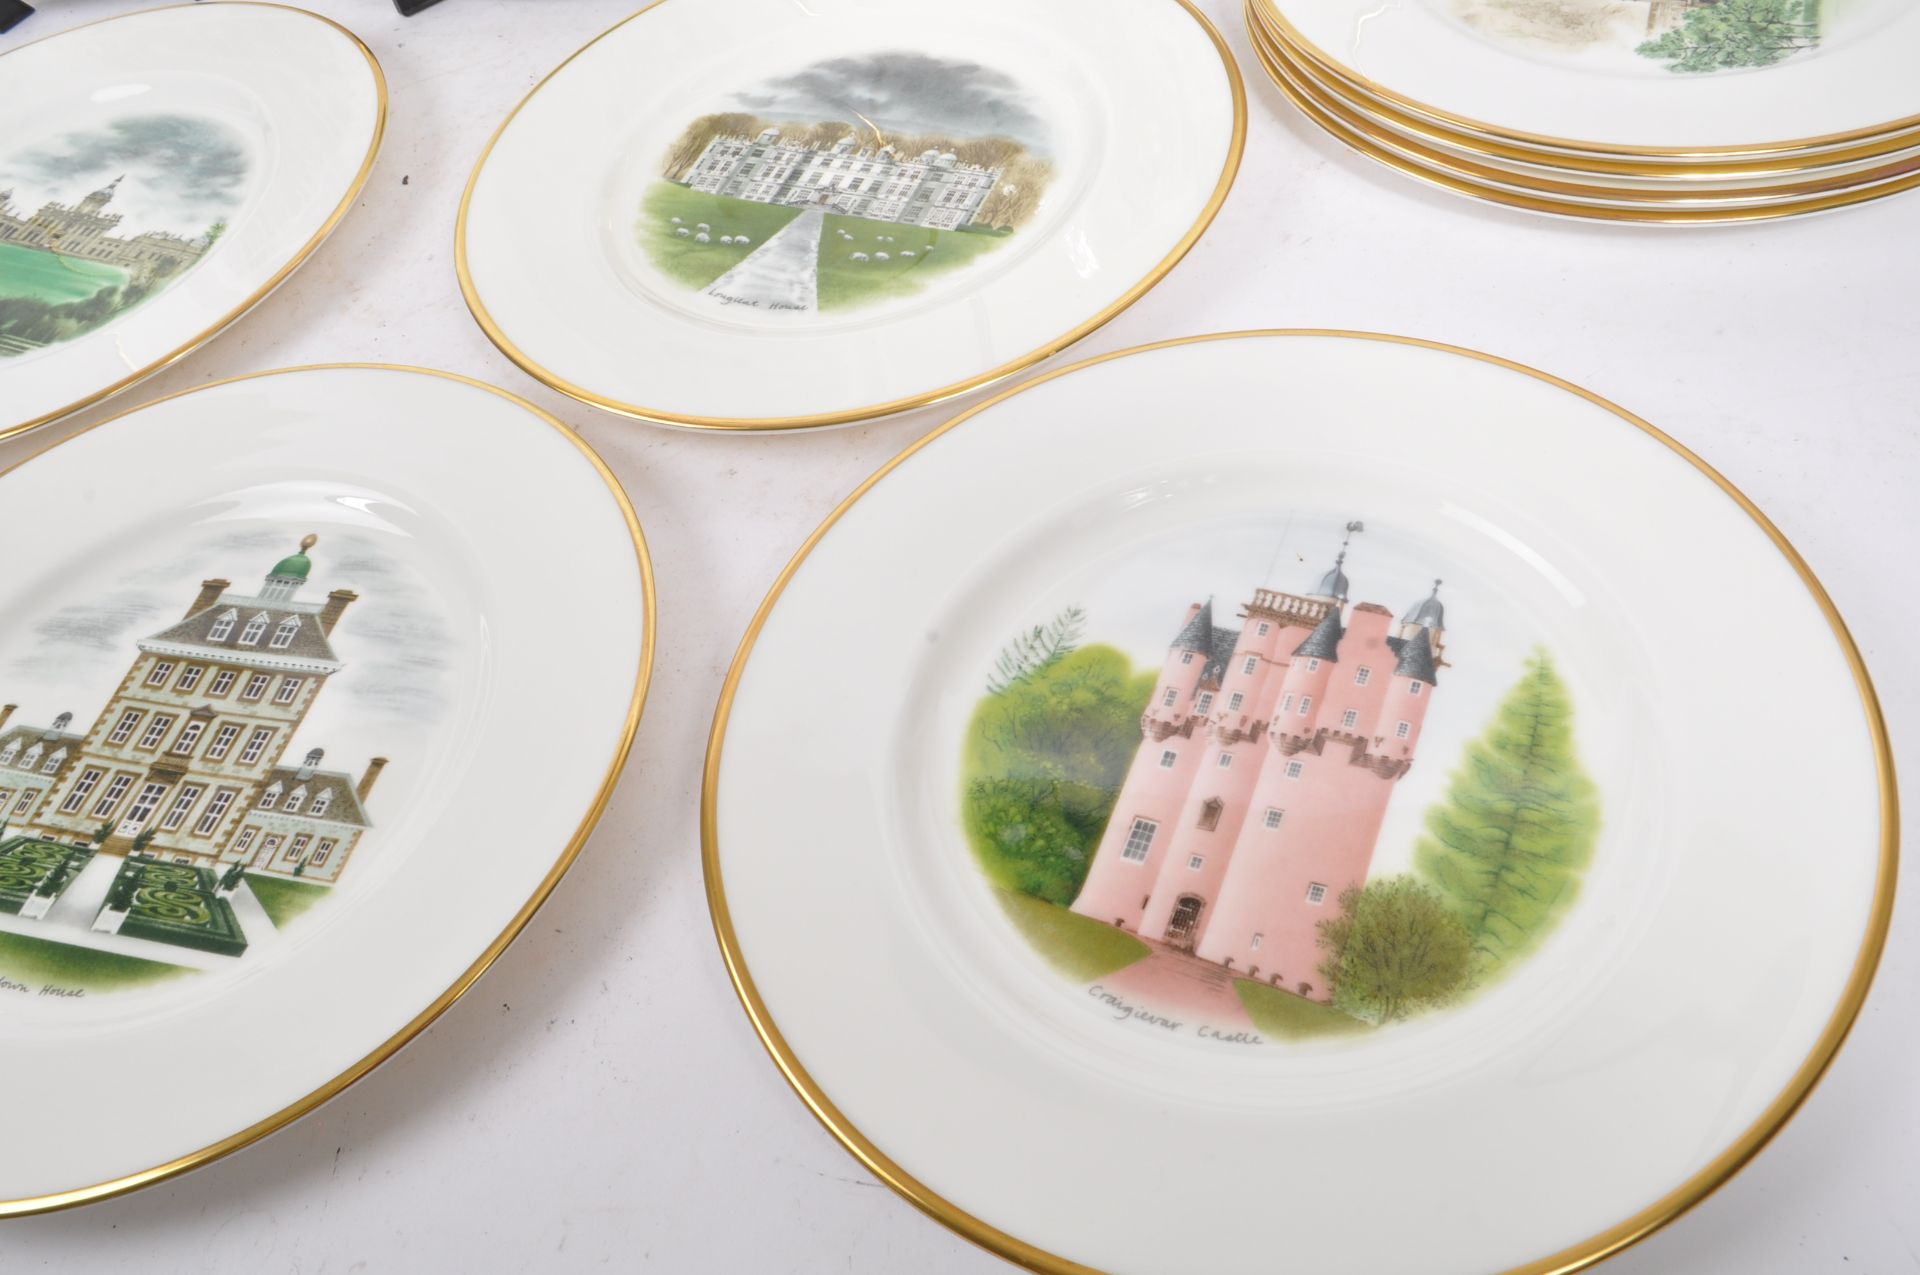 WEDGWOOD - CASTLE & COUNTRY HOUSE PORCELAIN PLATES - Image 7 of 11